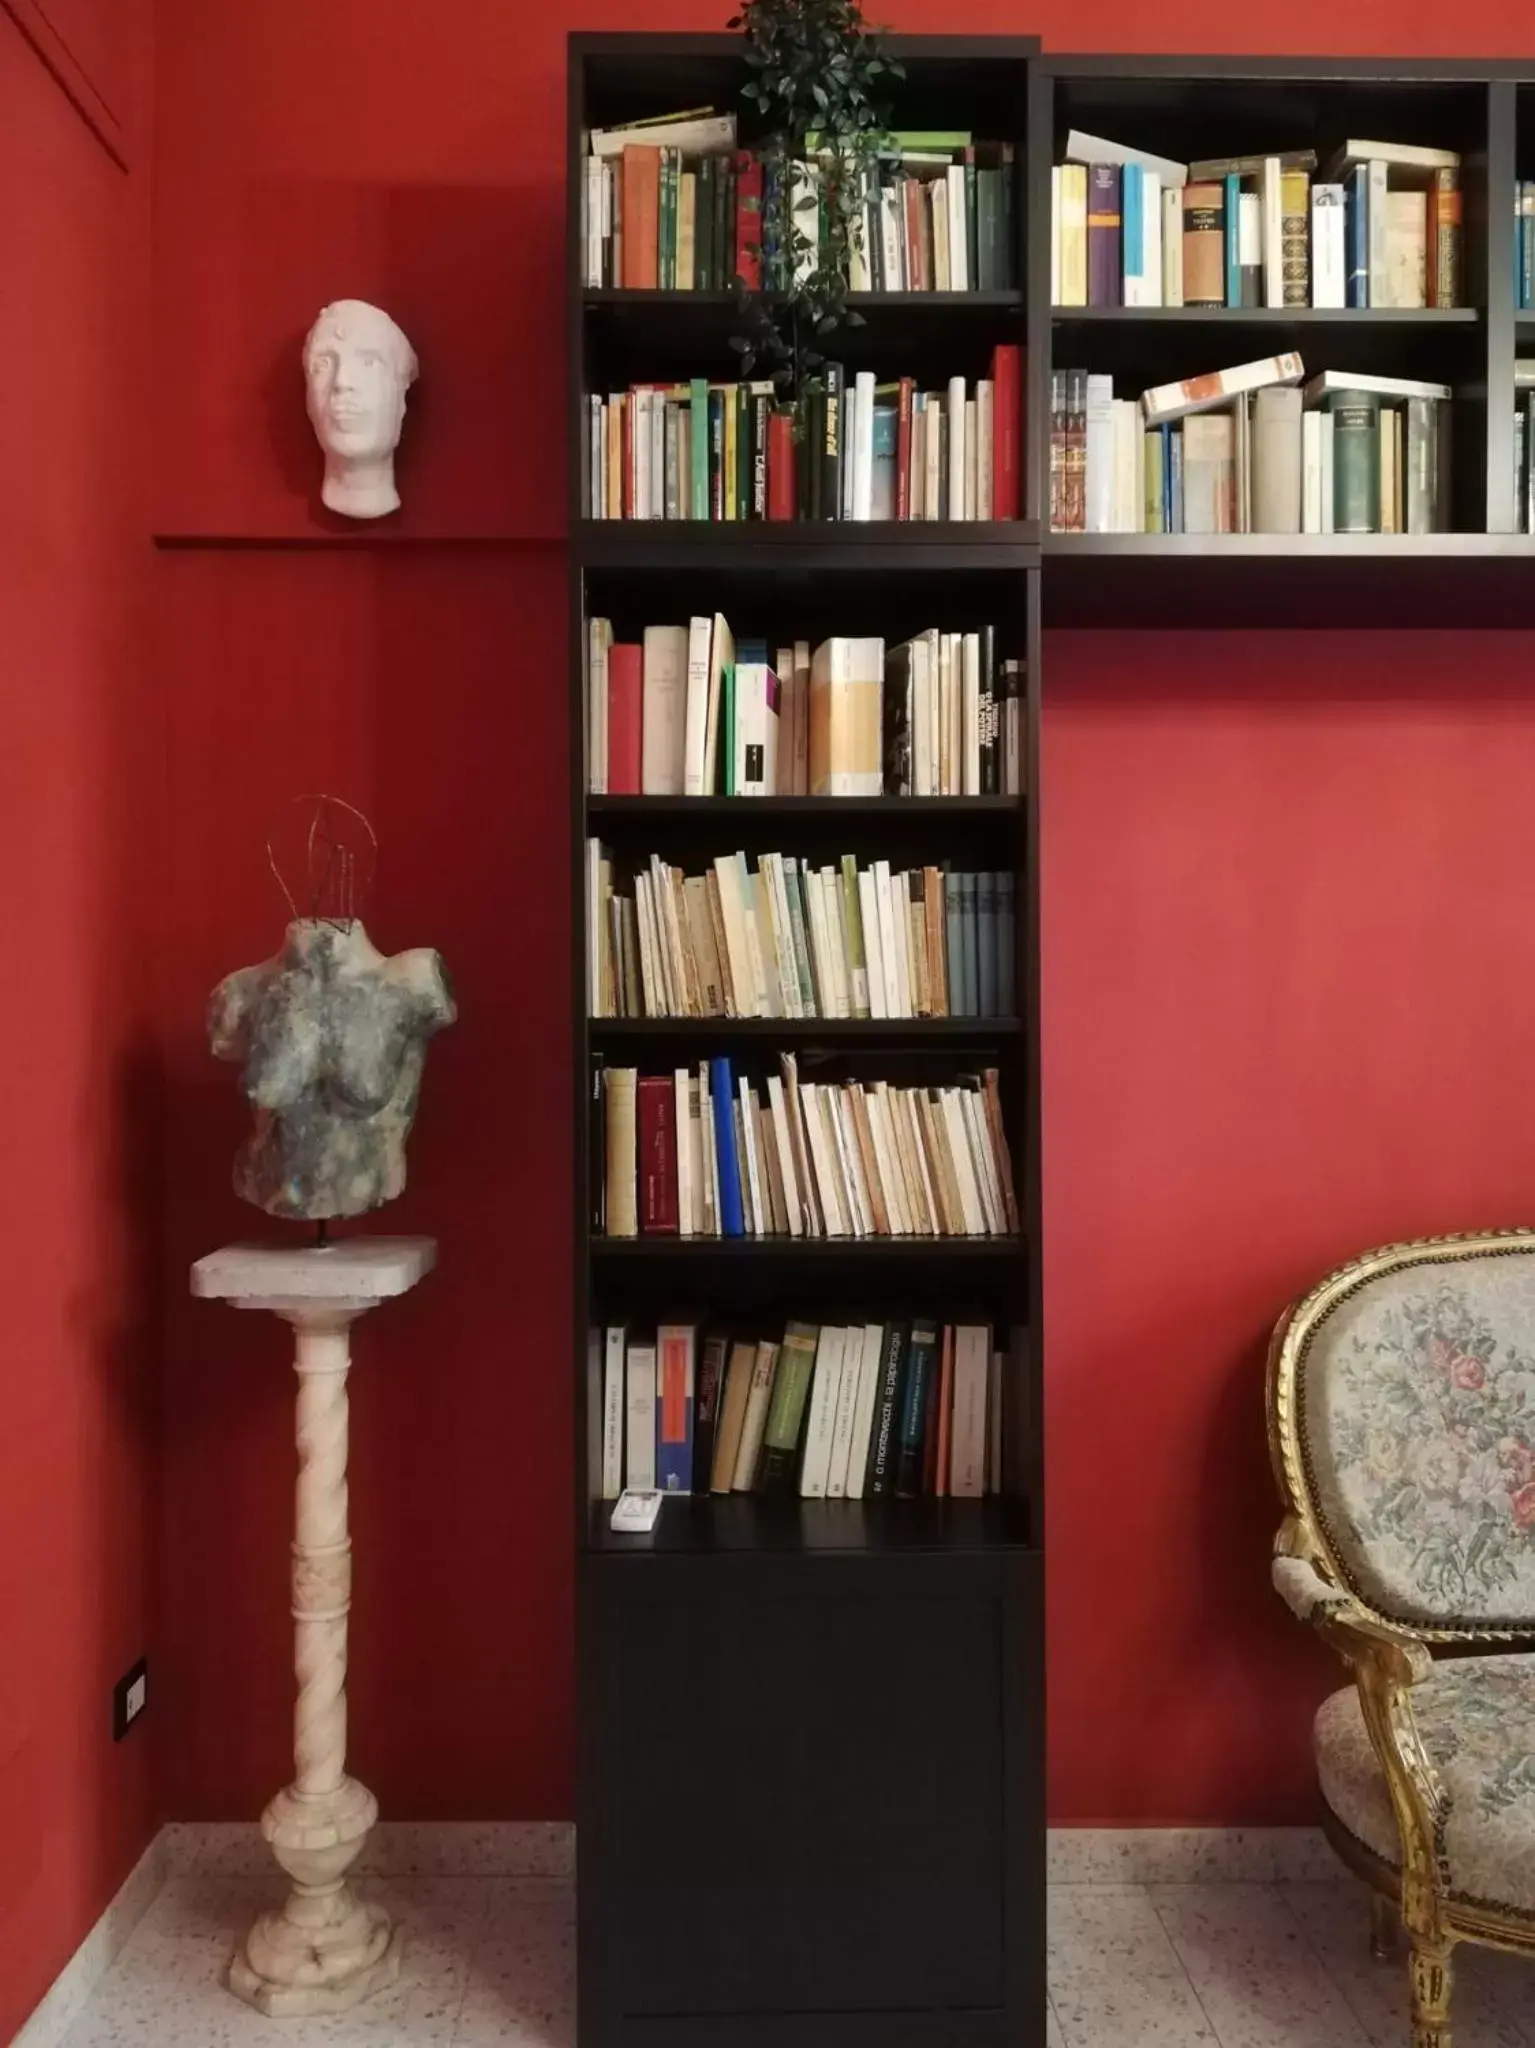 Library in The Painter's House